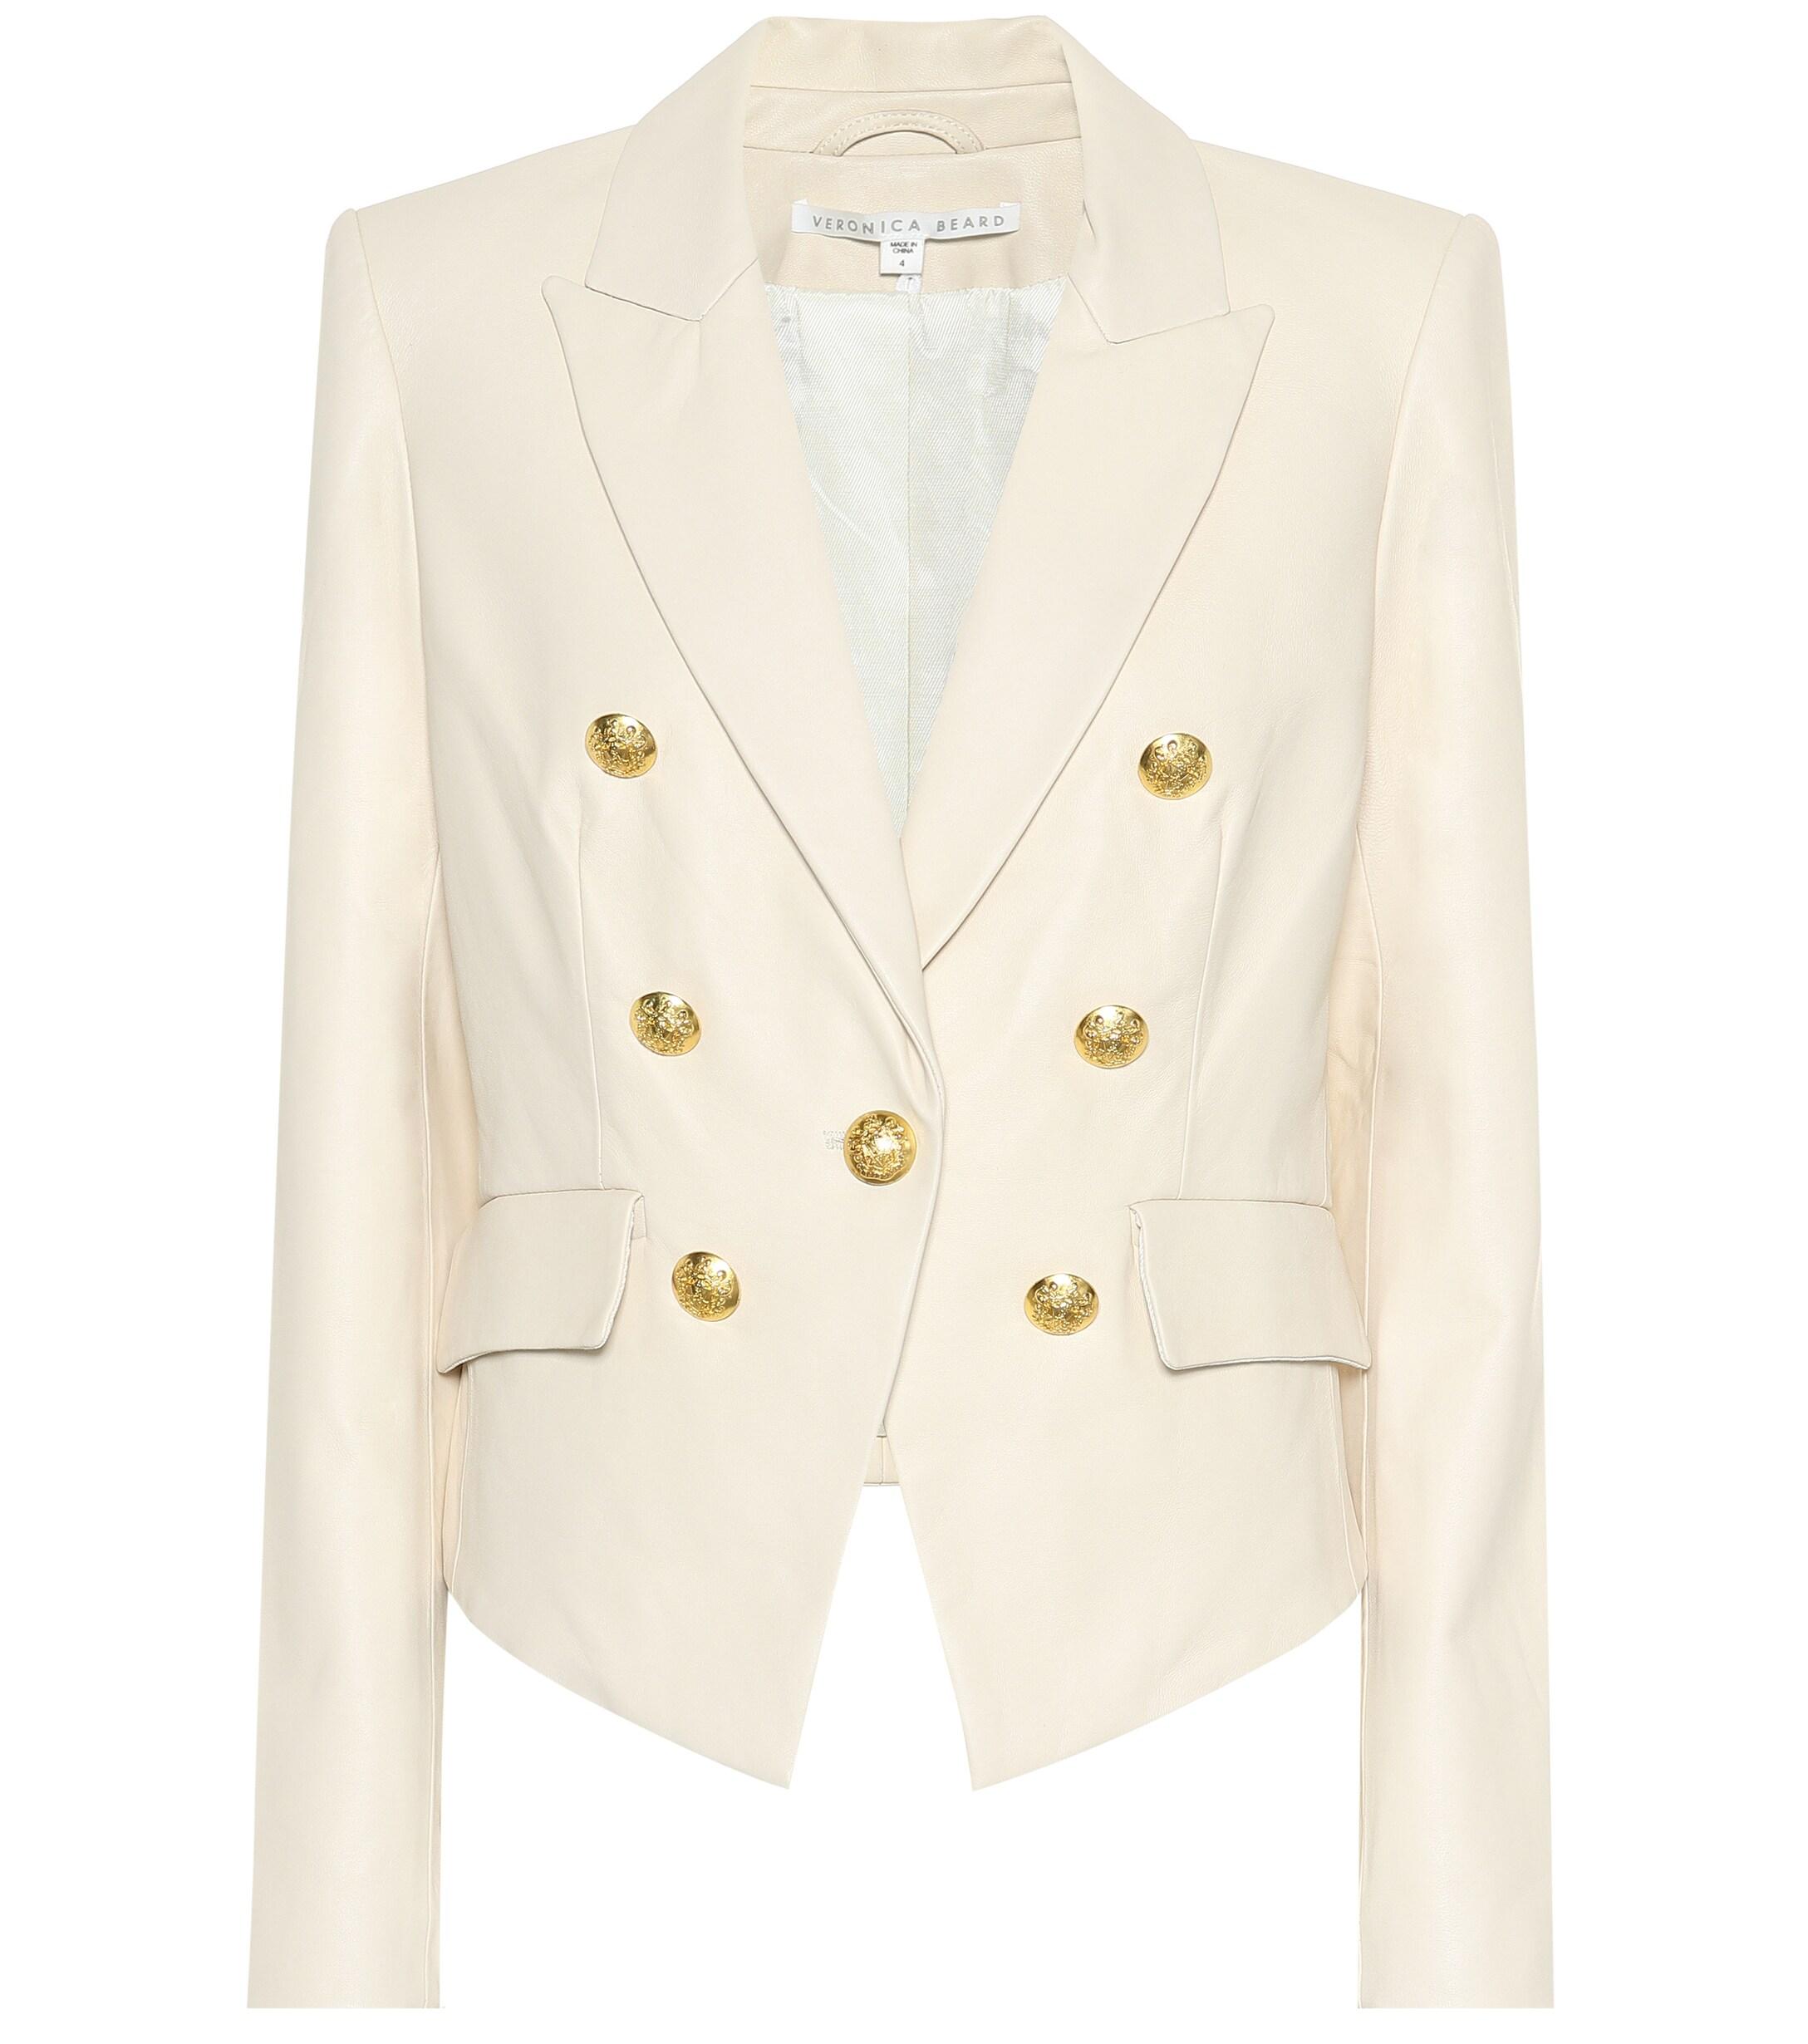 Veronica Beard Cooke Leather Blazer in Ivory (White) - Lyst